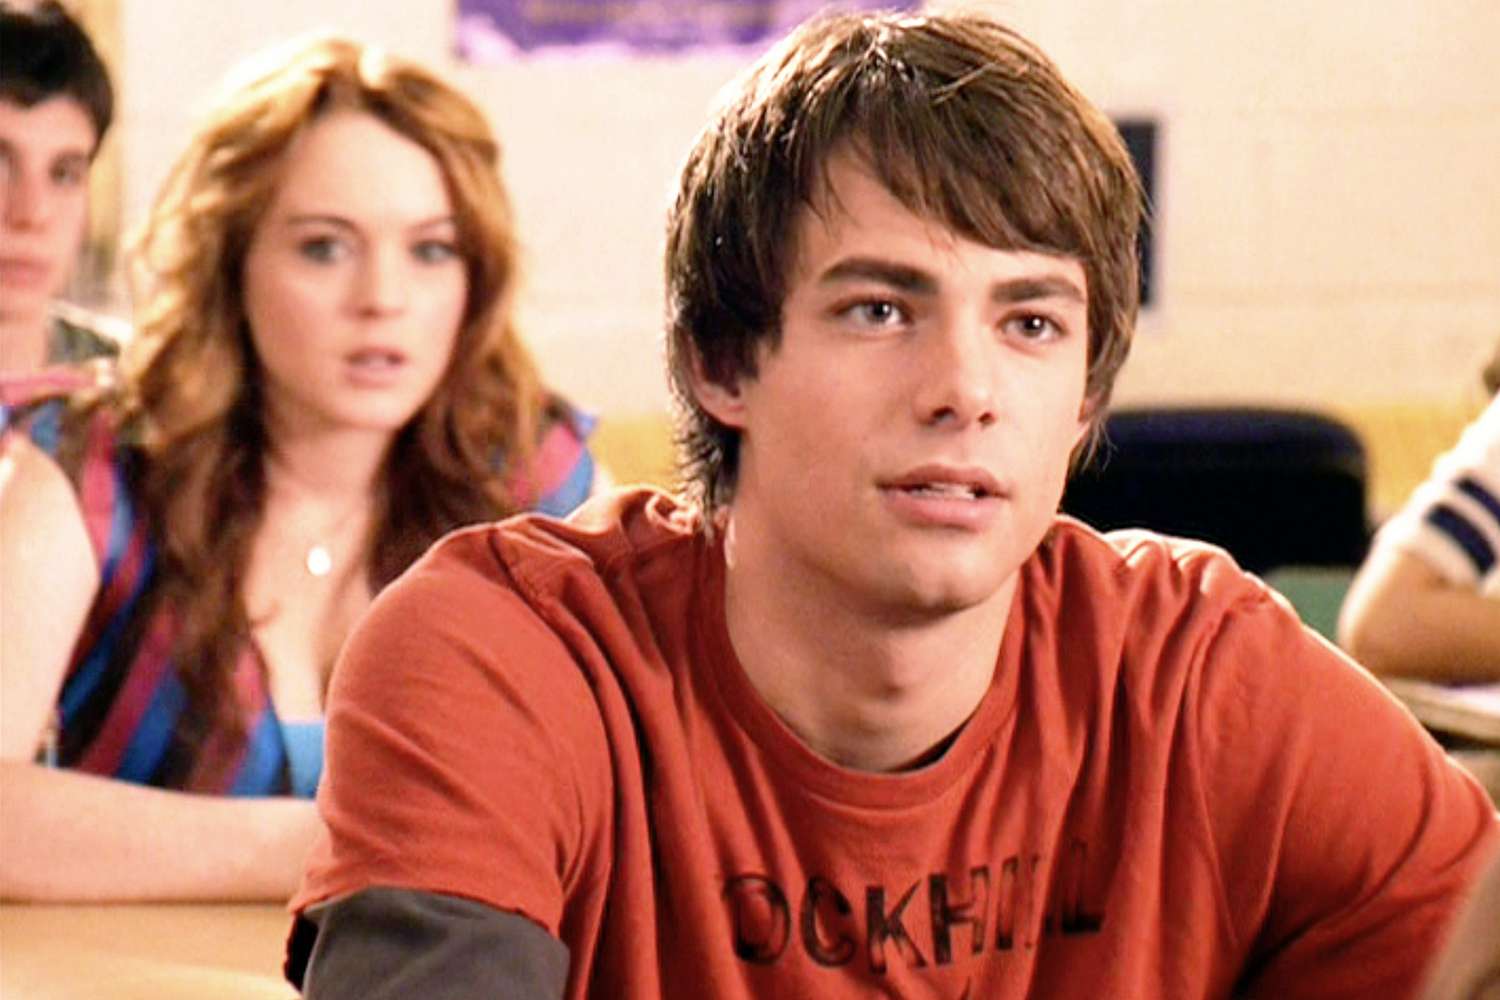 "Mean Girls", directed by Mark Waters. Seen here from left, Lindsay Lohan as Cady Heron and Jonathan Bennett as Aaron Samuels